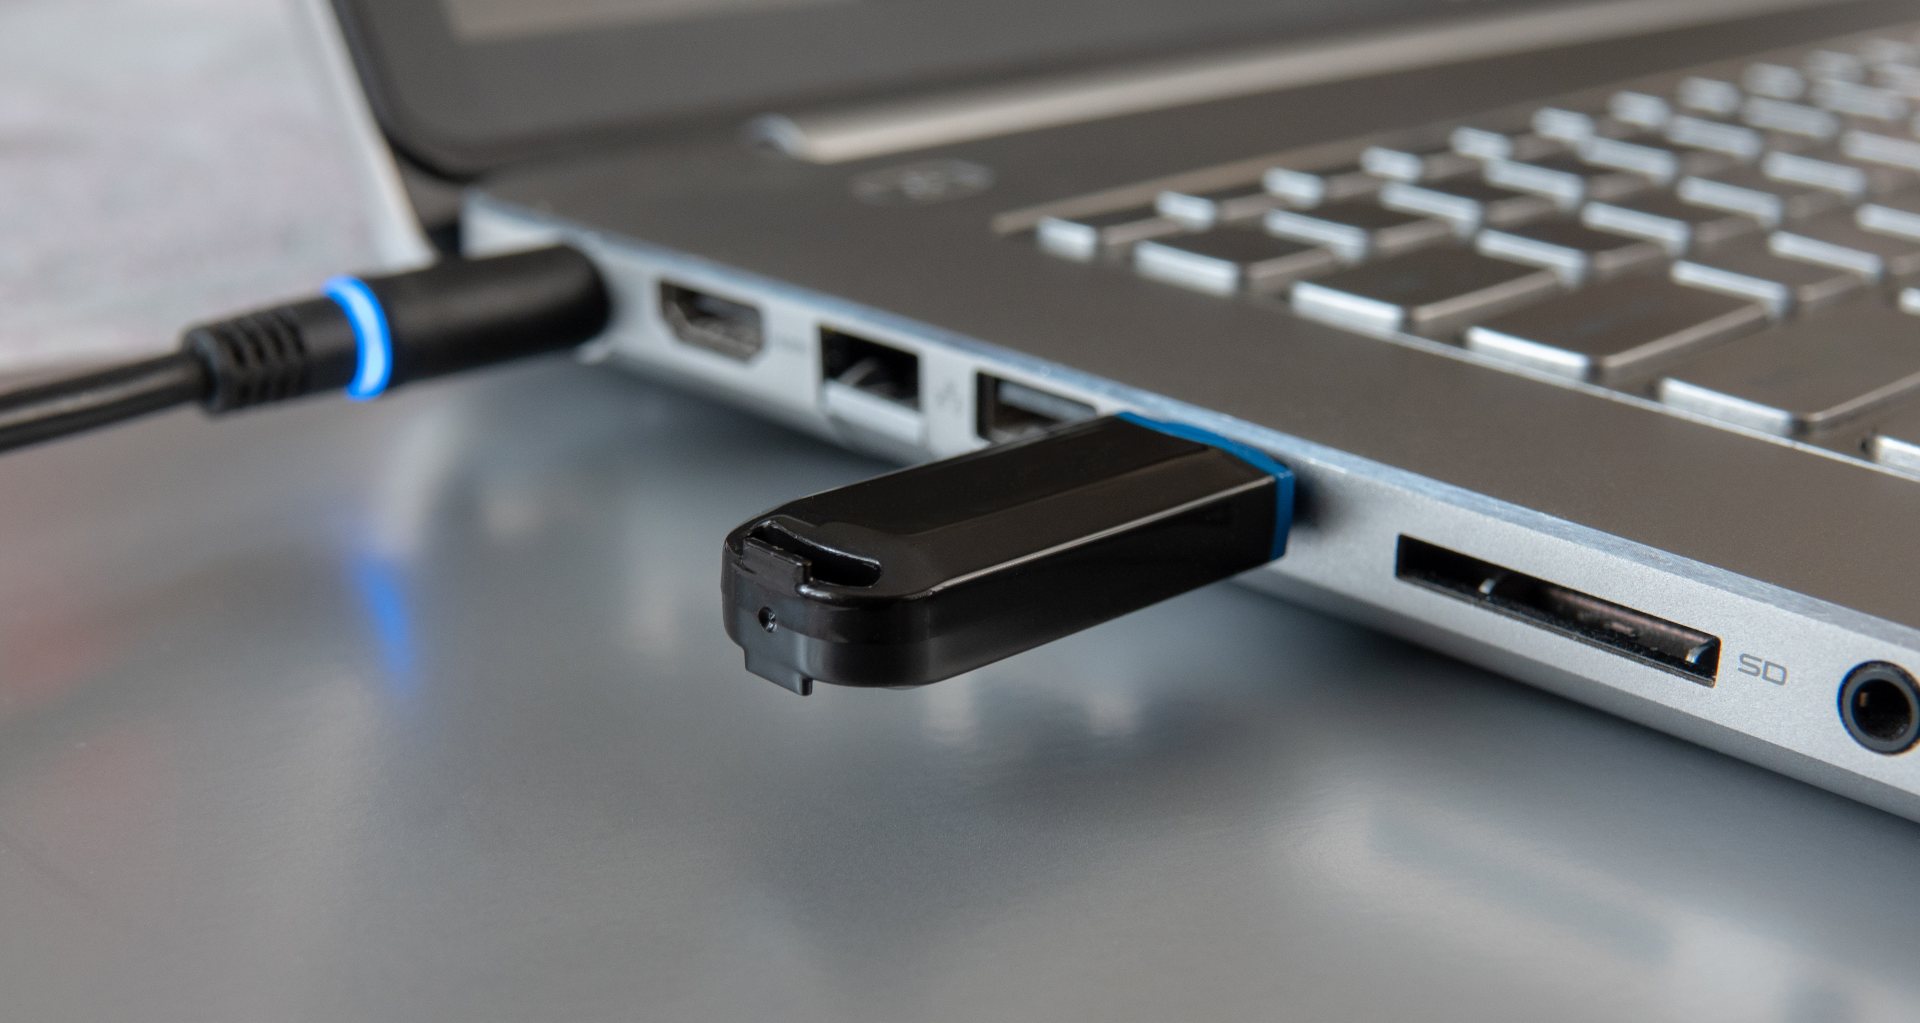 merge twist Wild SOLVED] How to Fix a Broken USB Stick and Recover Data